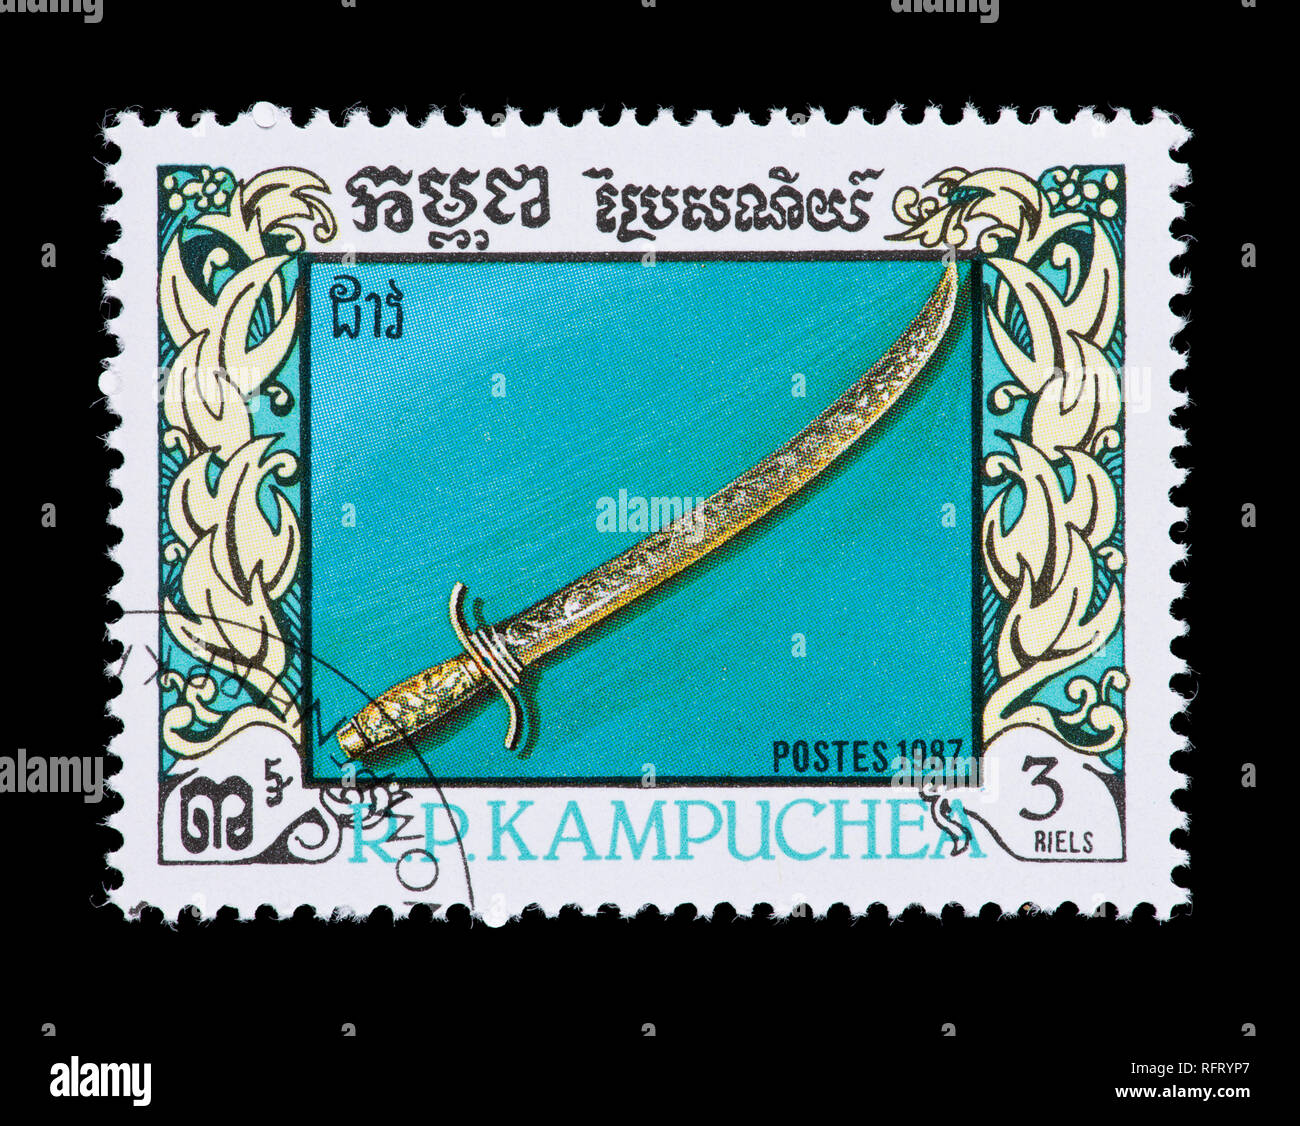 Postage stamp from Cambodia (Kampuchea) depicting a sword Stock Photo